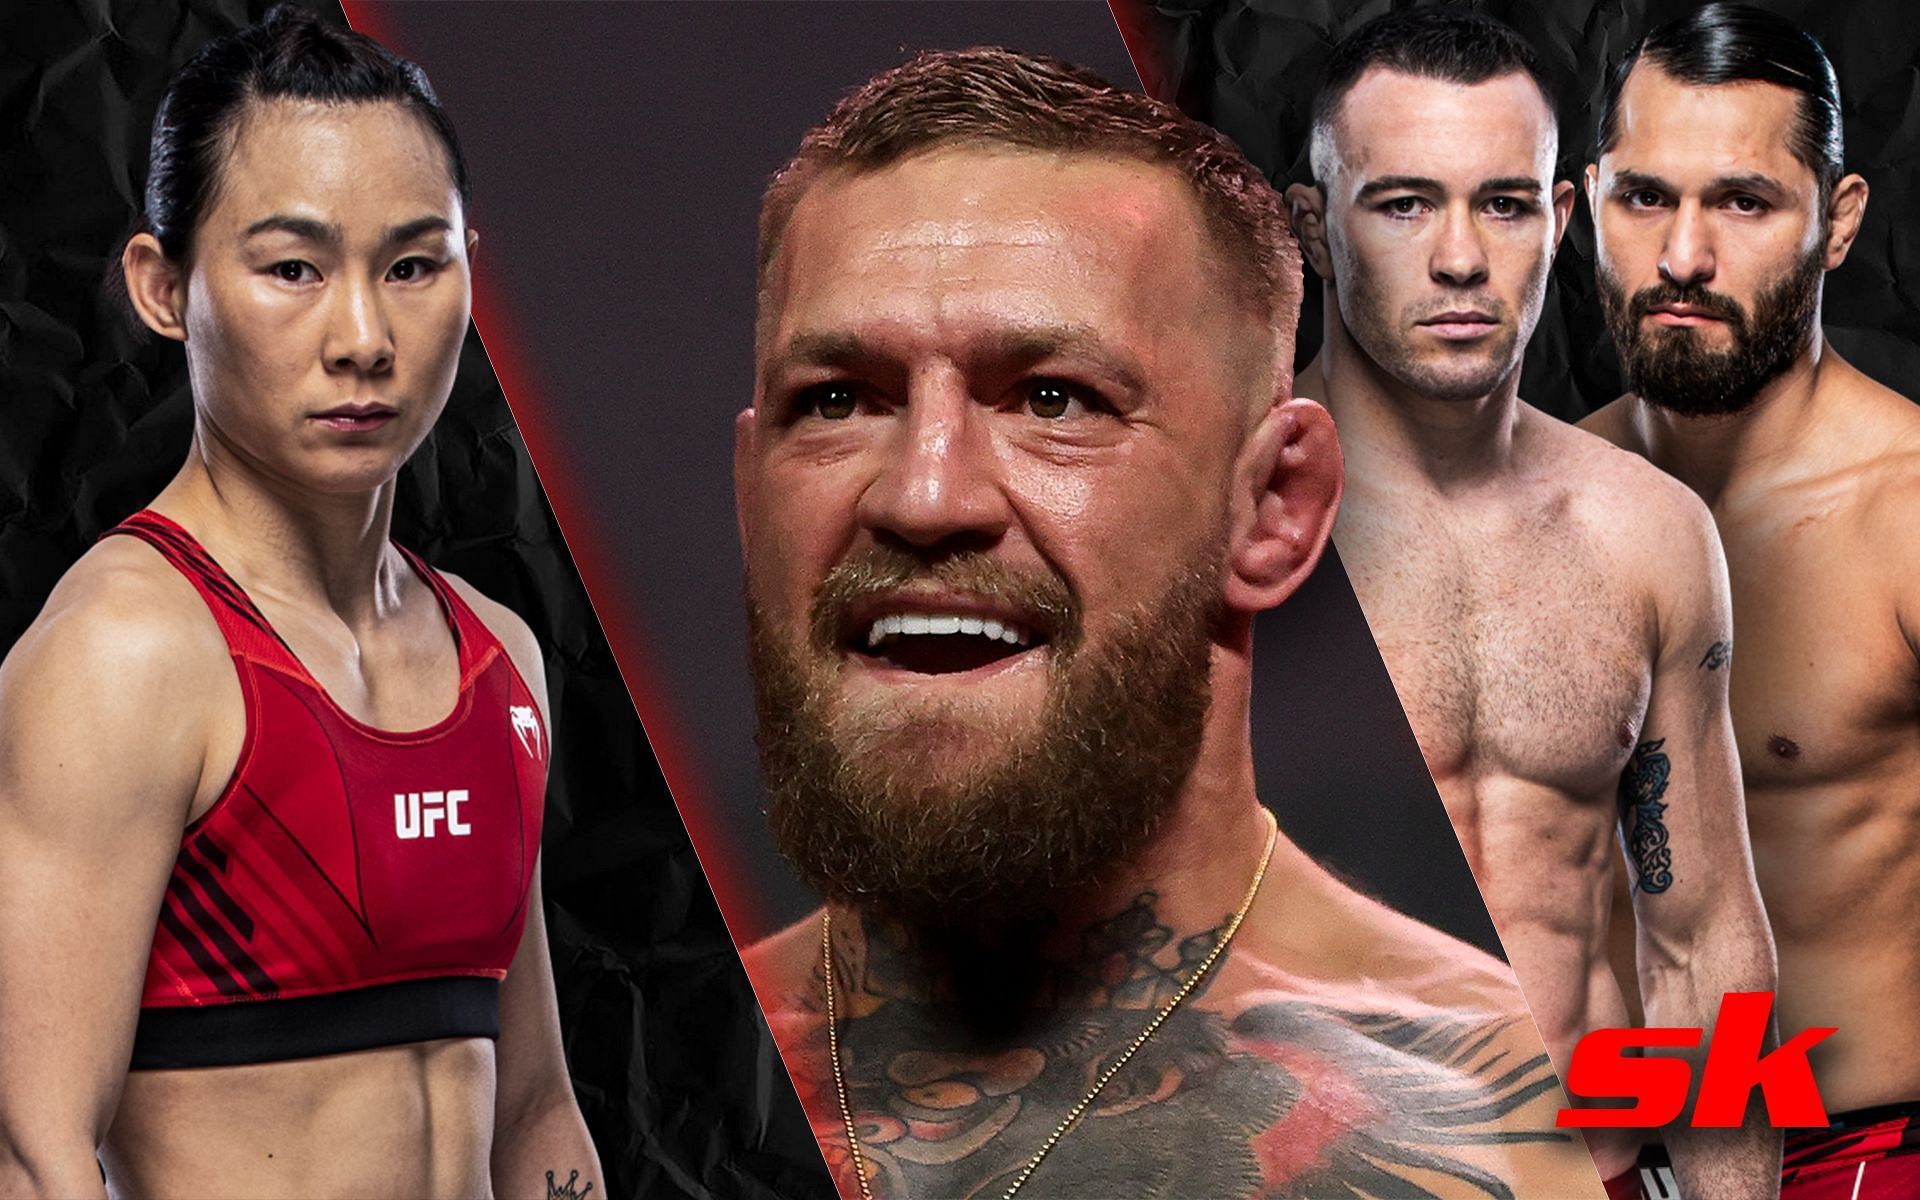 Yan Xiaonan weighs in on Colby Covington vs. Jorge Masvidal and Conor McGregor&#039;s good looks [Photo credit: ufc.com &amp; Getty]